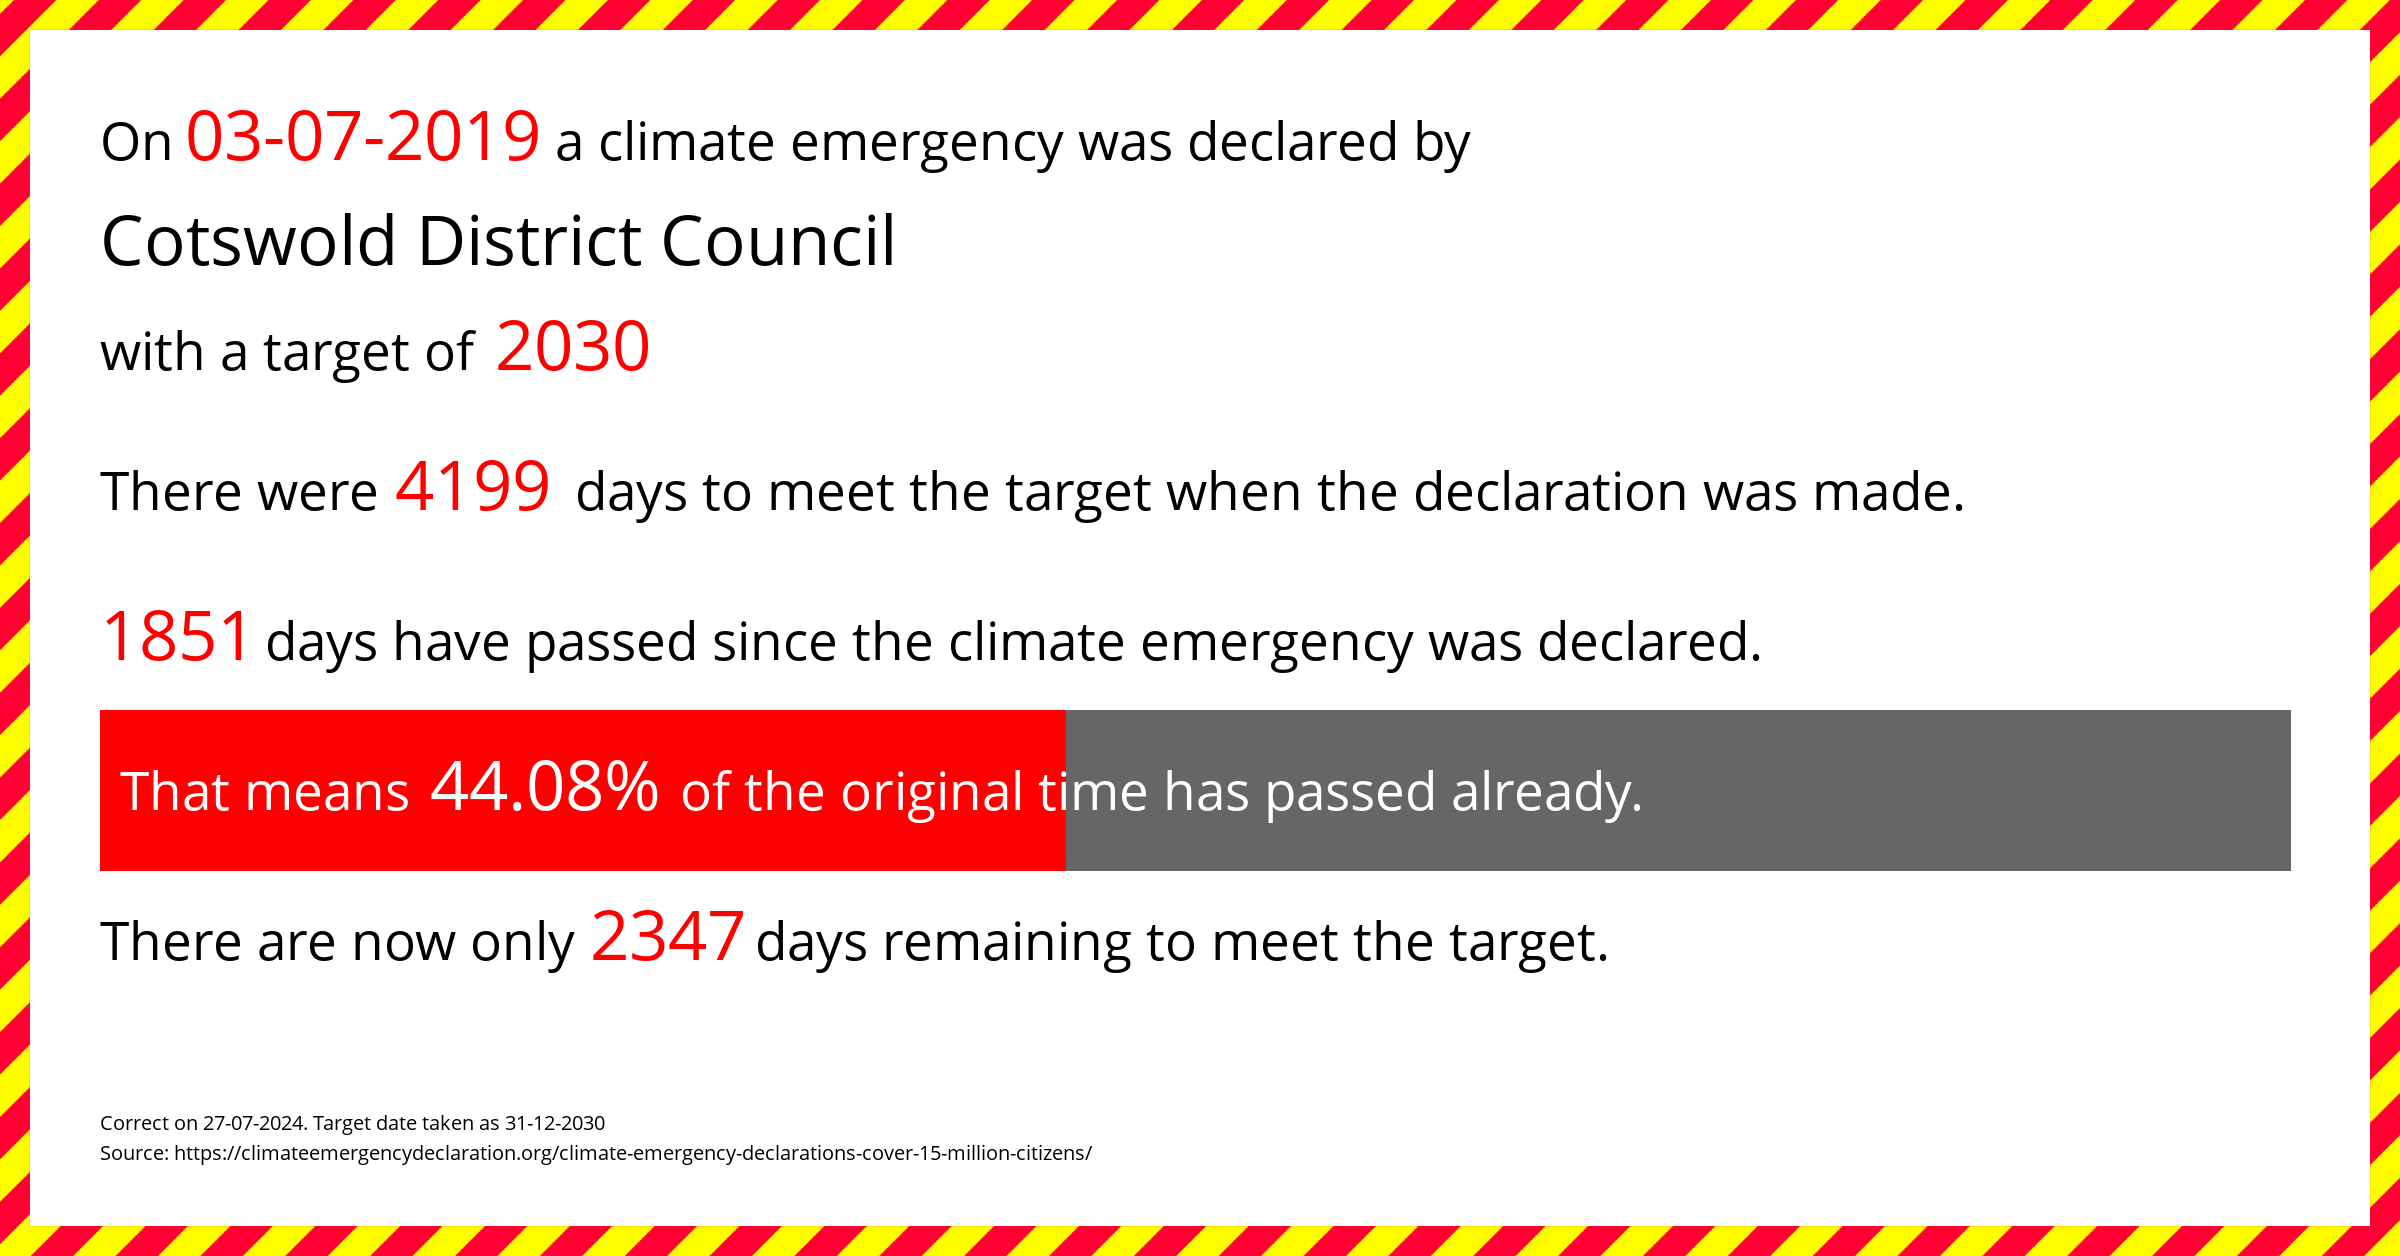 Cotswold District Council declared a Climate emergency on Wednesday 3rd July 2019, with a target of 2030.